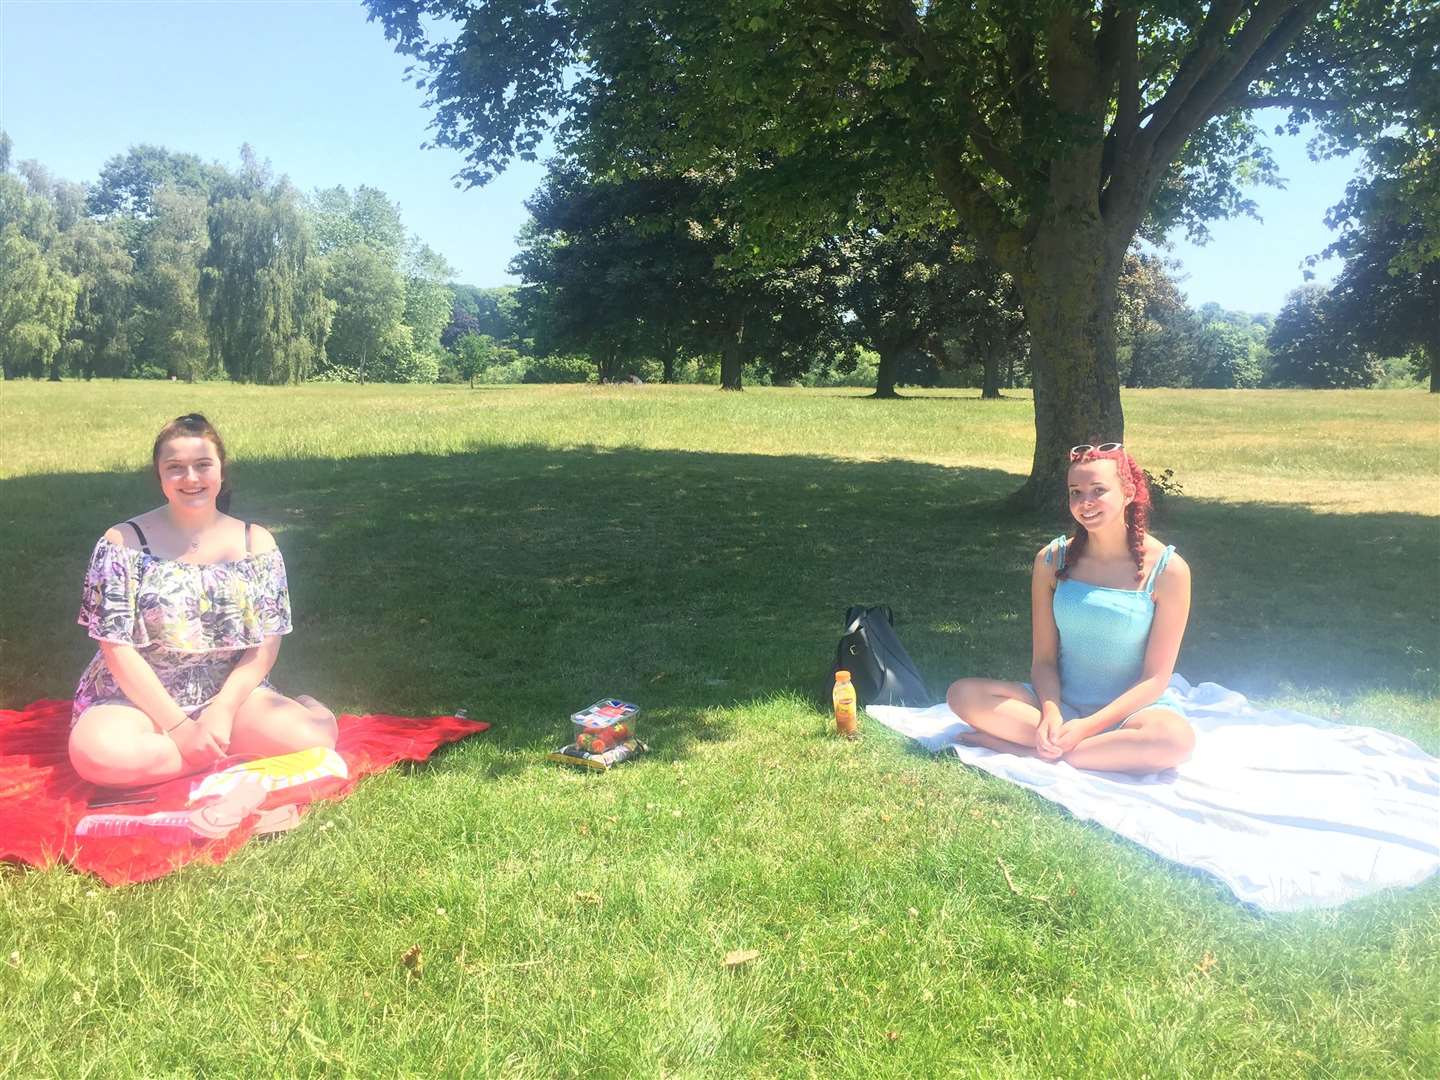 Amy Irwin and Abigail Bascall Kelly, both 16 from Maidstone, soak up the sun at Mote Park